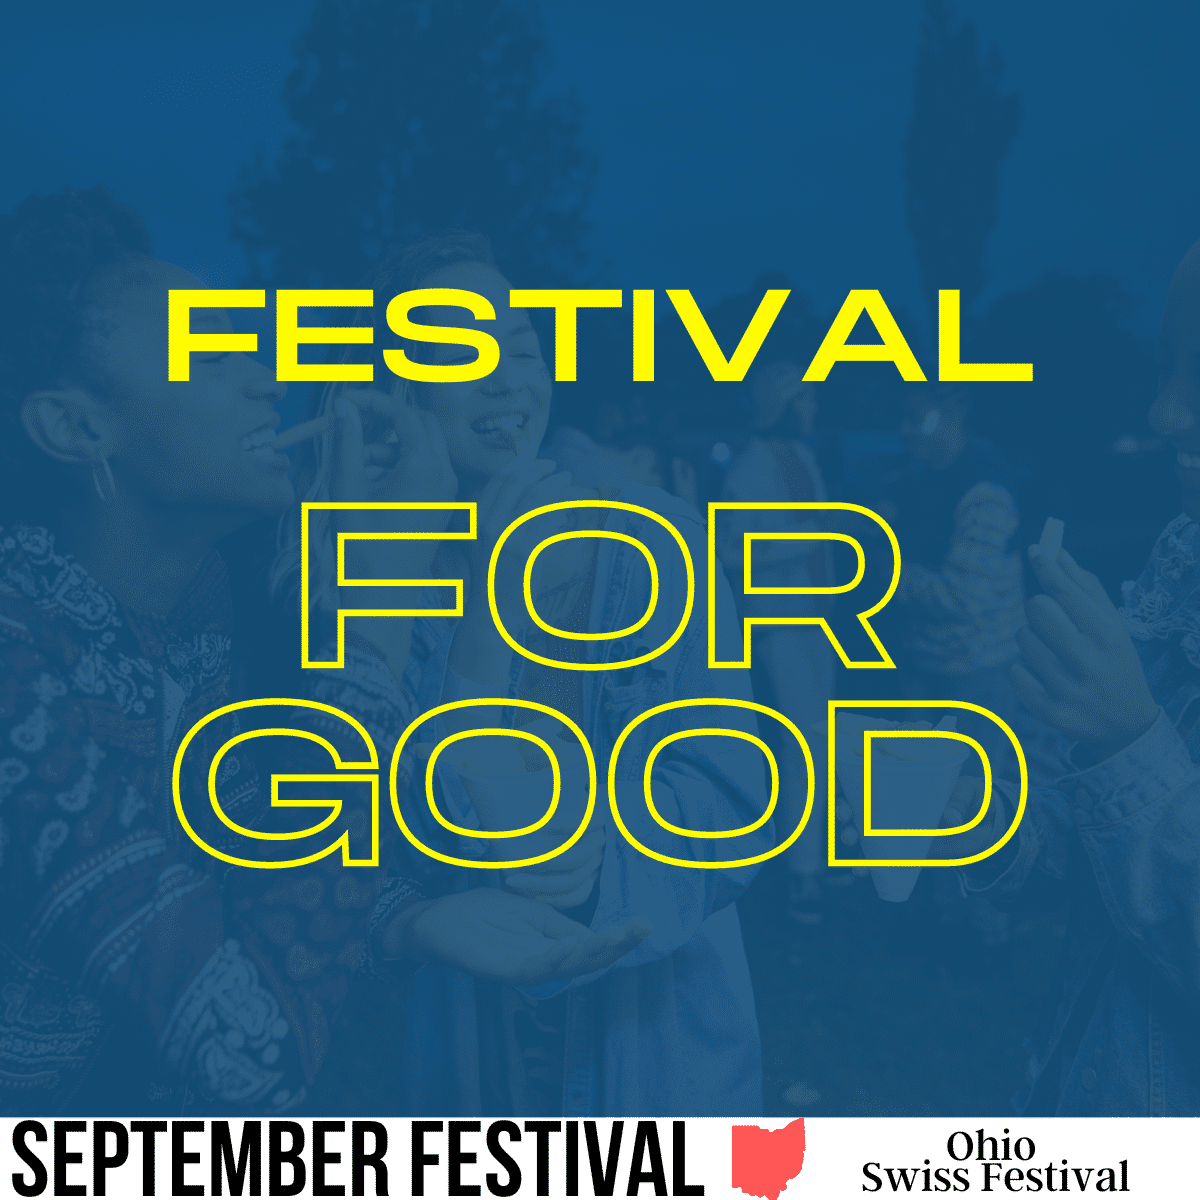 people at a festival eating french fries with a dark blue screen over top with words: festival for good - image made with canva pro lincense, free image